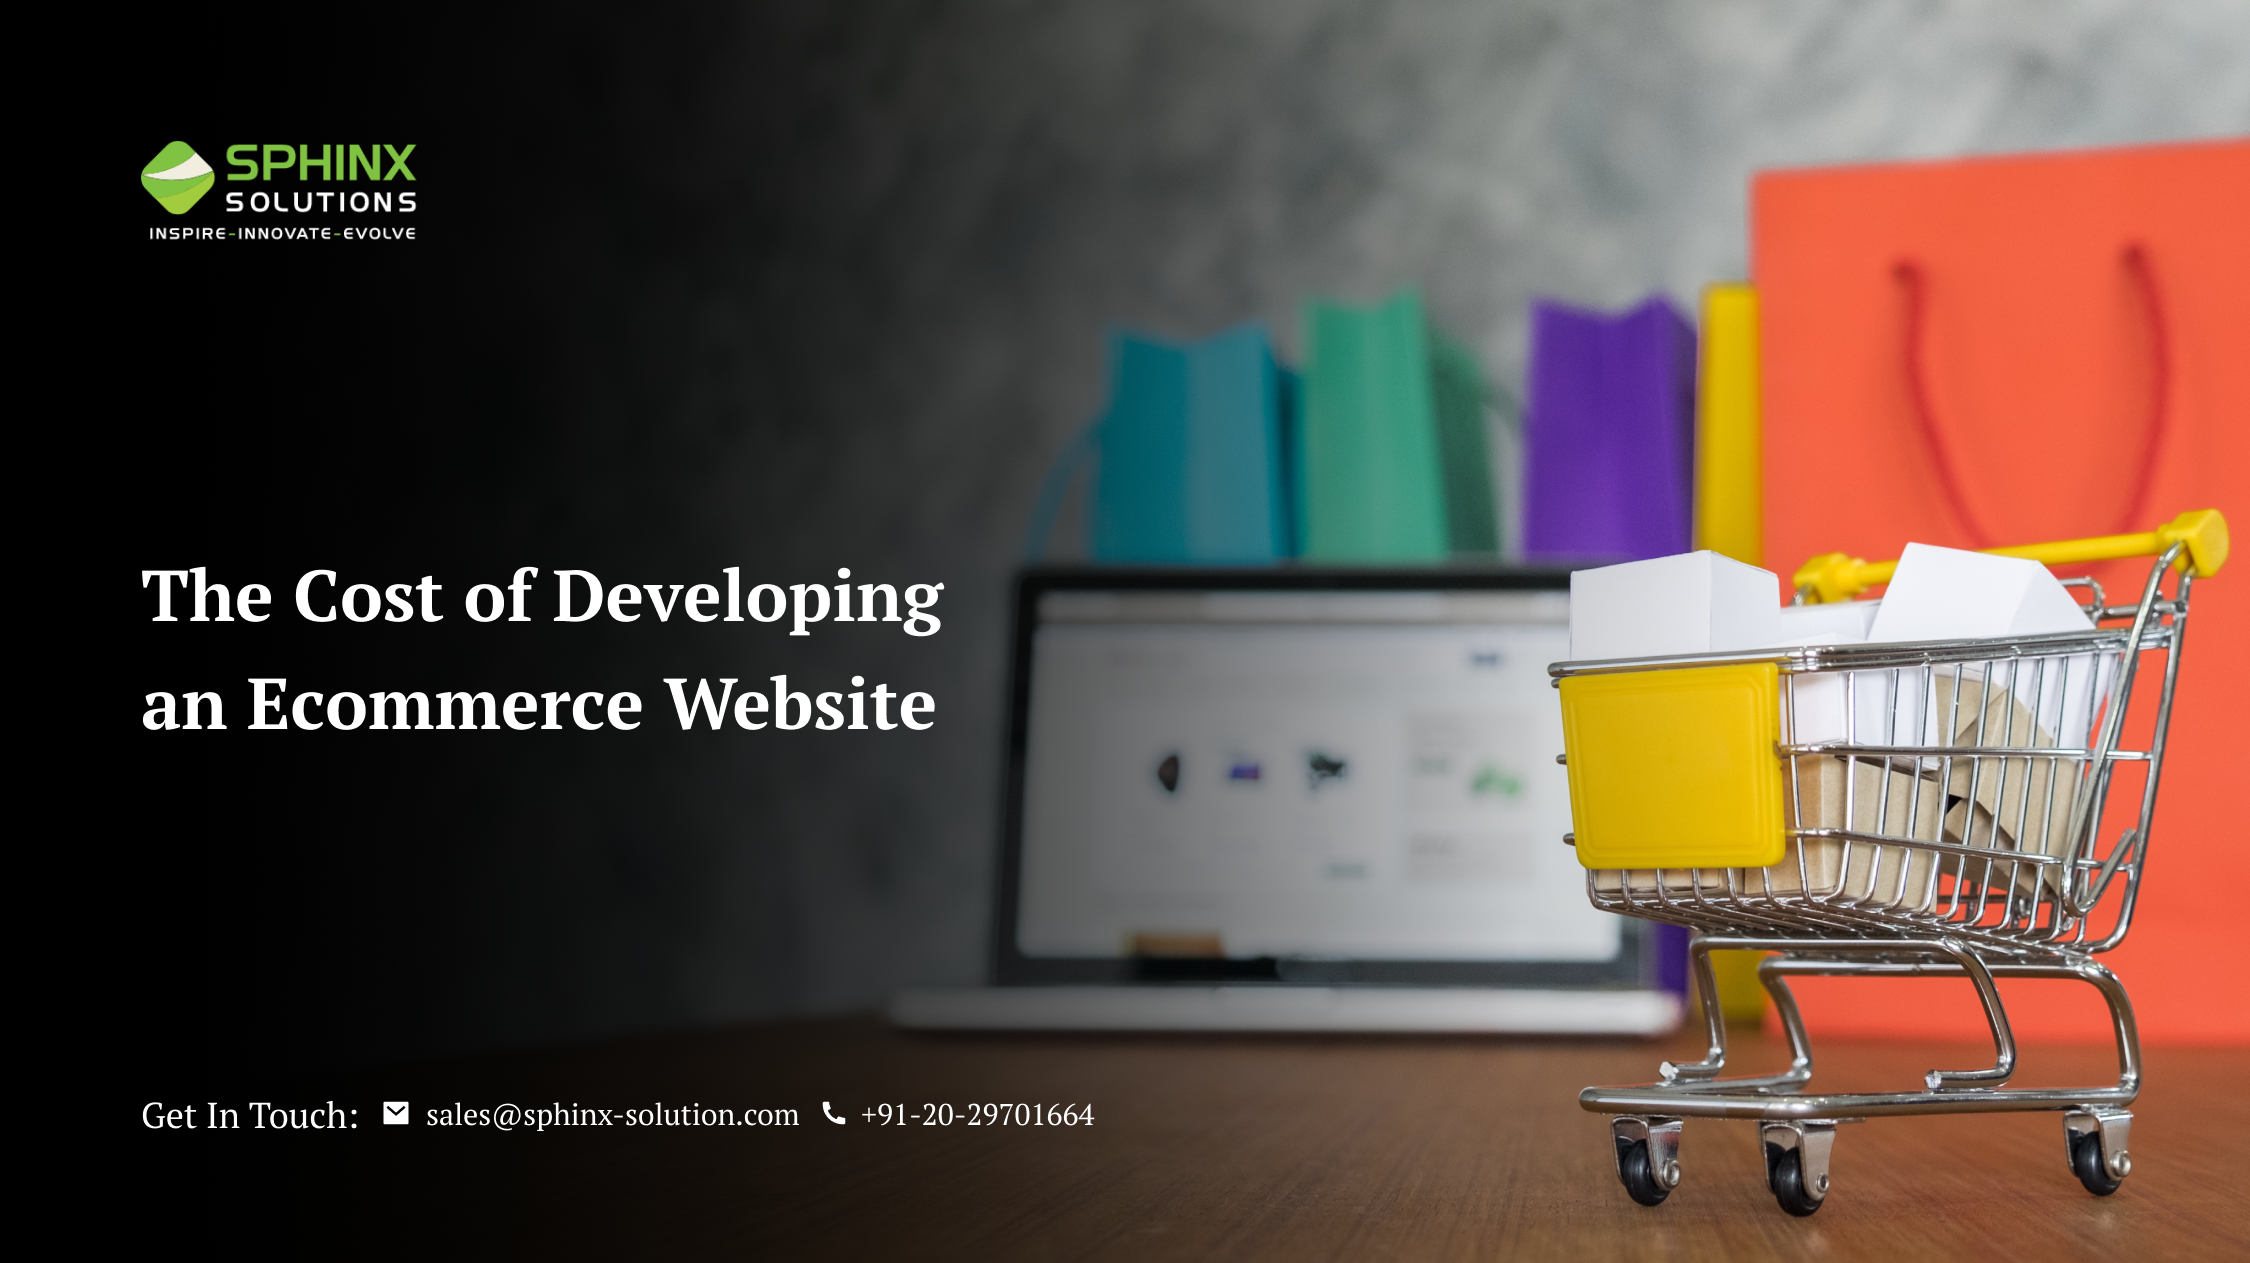 SPHINX

INSPIRE- INNOVATE - EVOLVE

The Cost of Developing
an Ecommerce Website

 

Get In Touch: sales@sphinx-solution.com % +91-20-29701664